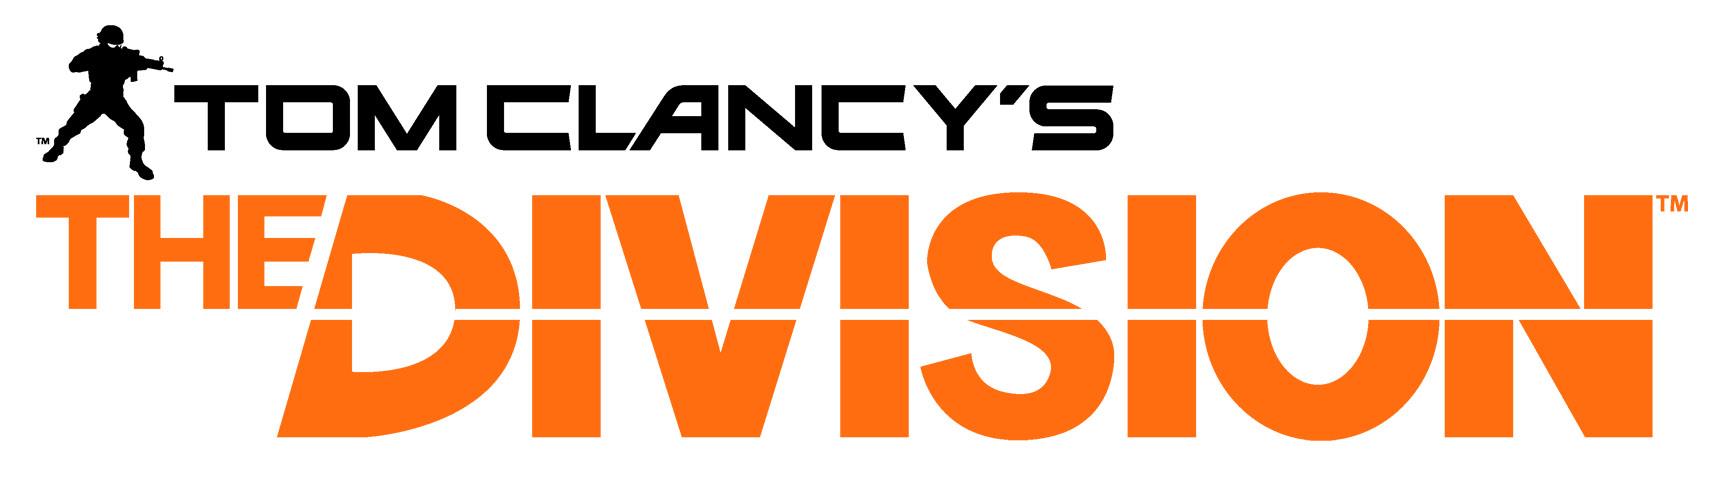 Tom Clancy's The Division Logo